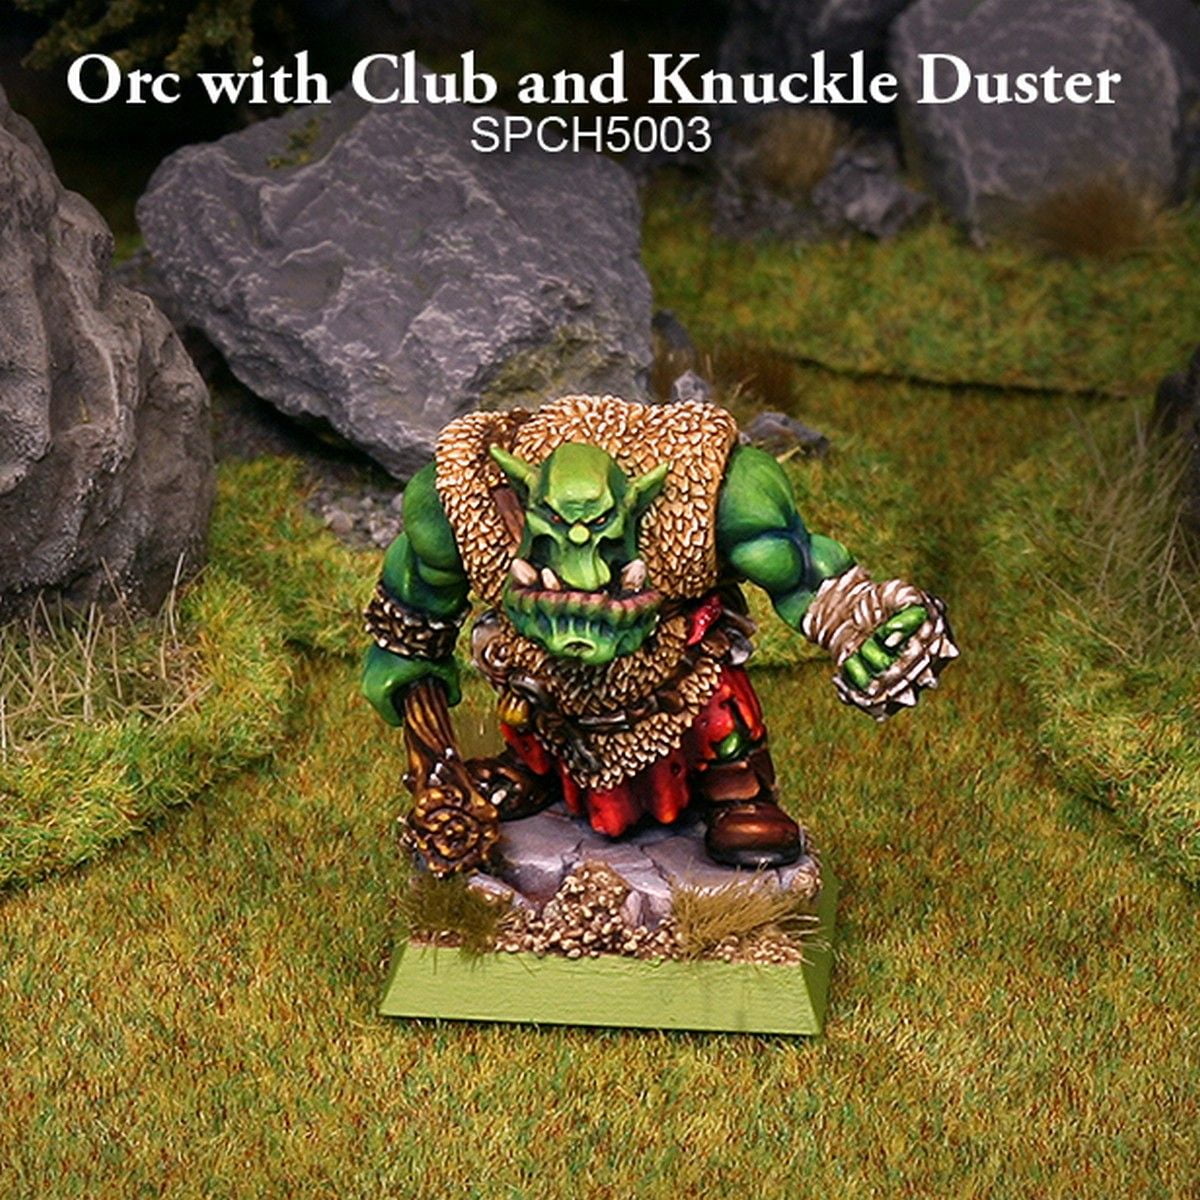 Orc with Club and Knuckle Duster